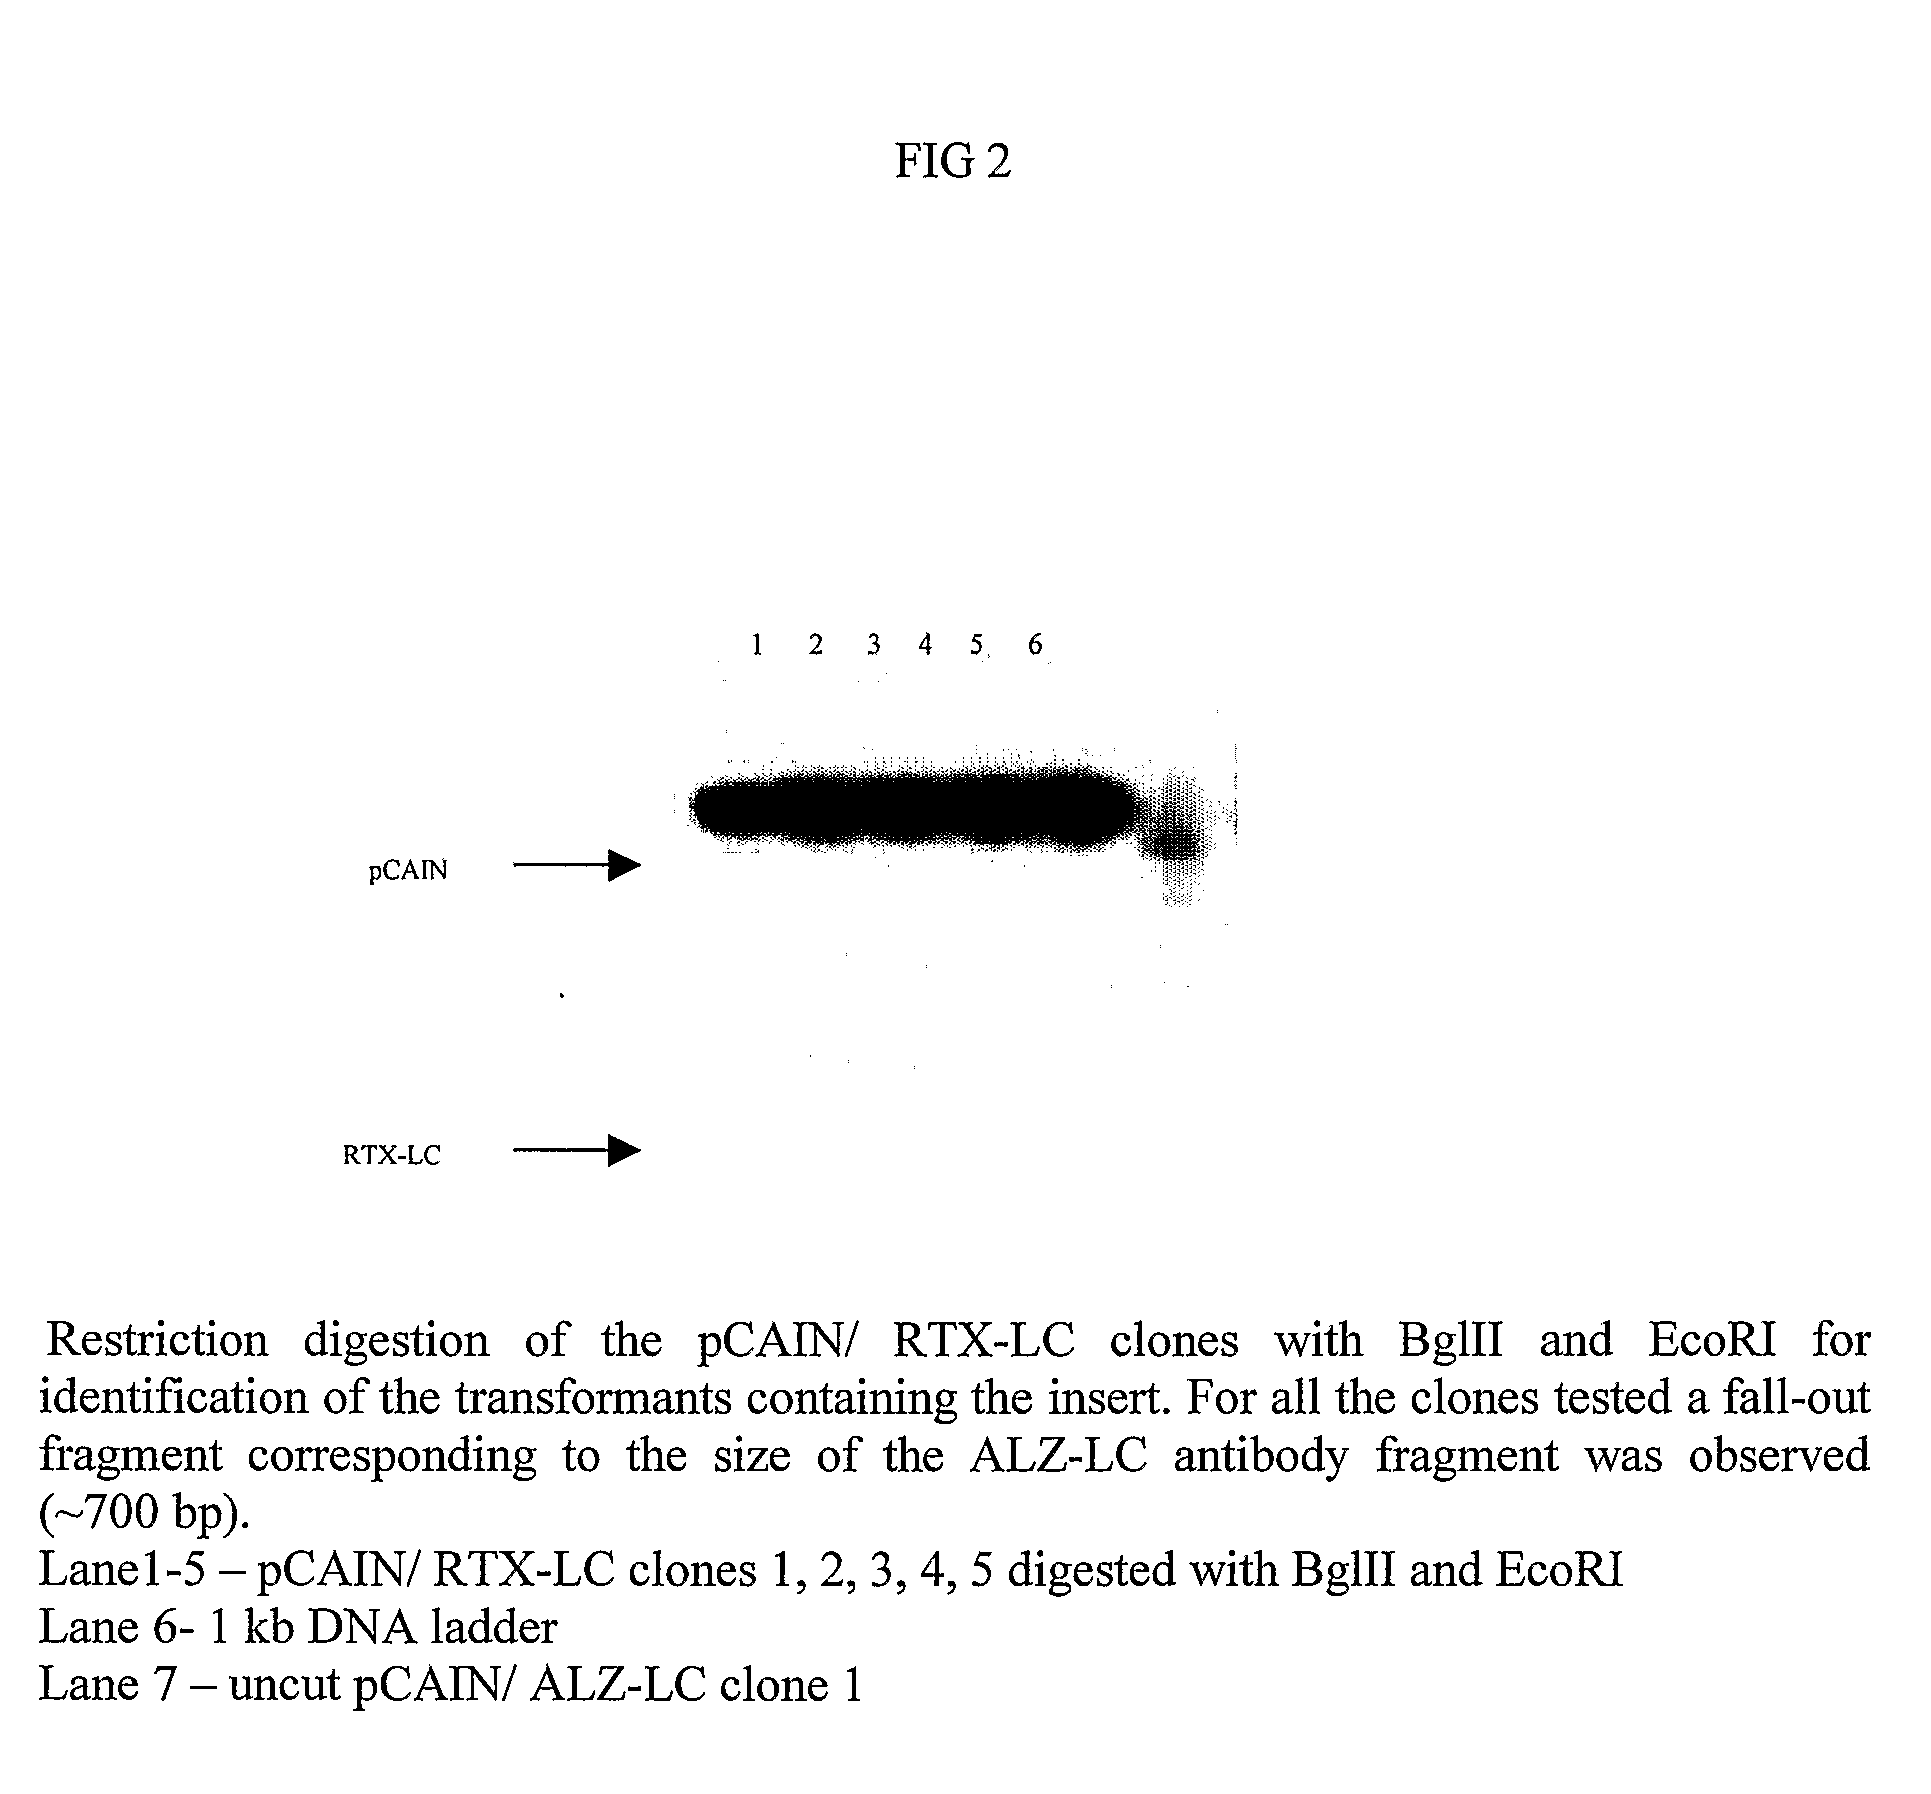 Method for the Production of a Monoclonal Antibody to CD20 for the Treatment of B-Cell Lymphoma